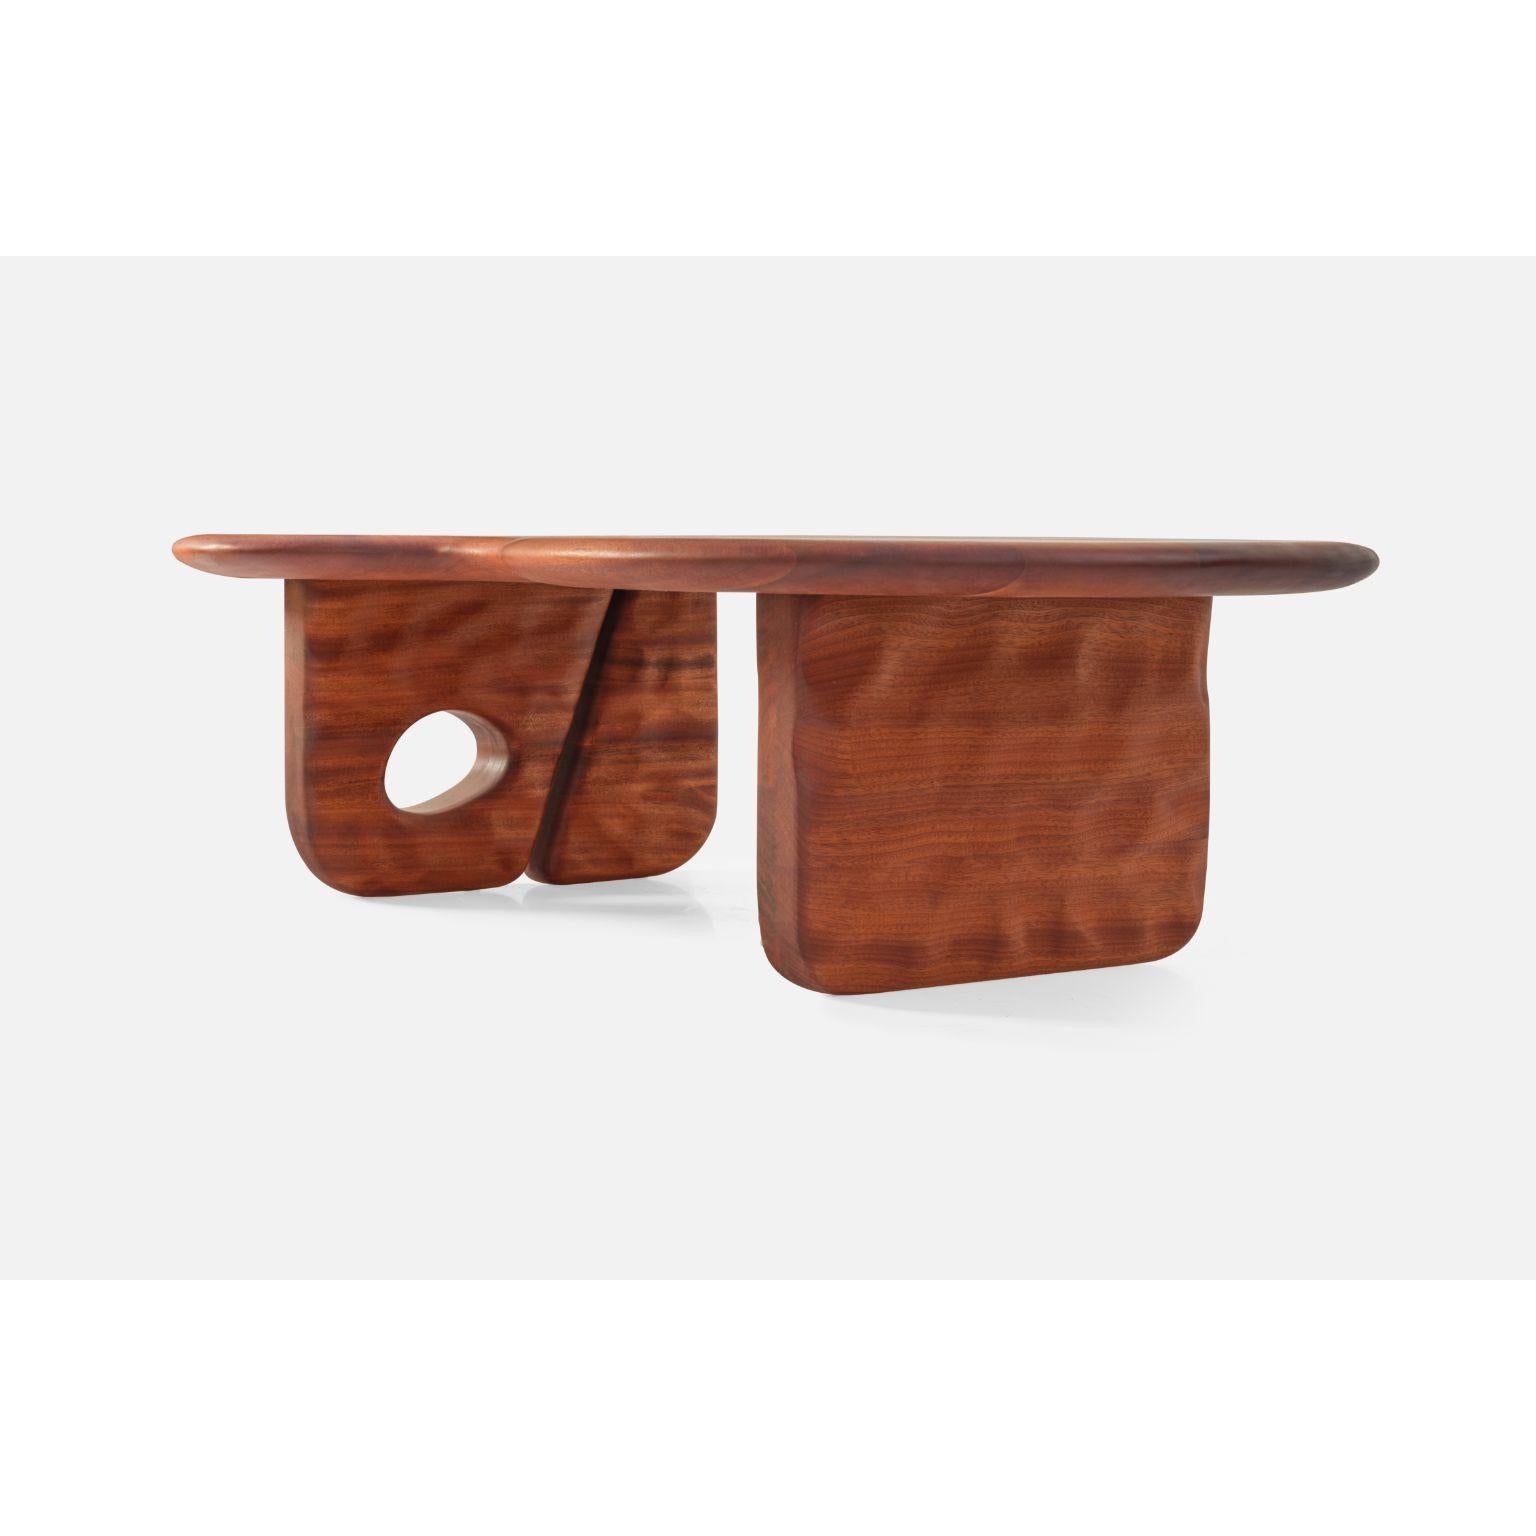 Avasin Low Table by Contemporary Ecowood (Handgefertigt) im Angebot